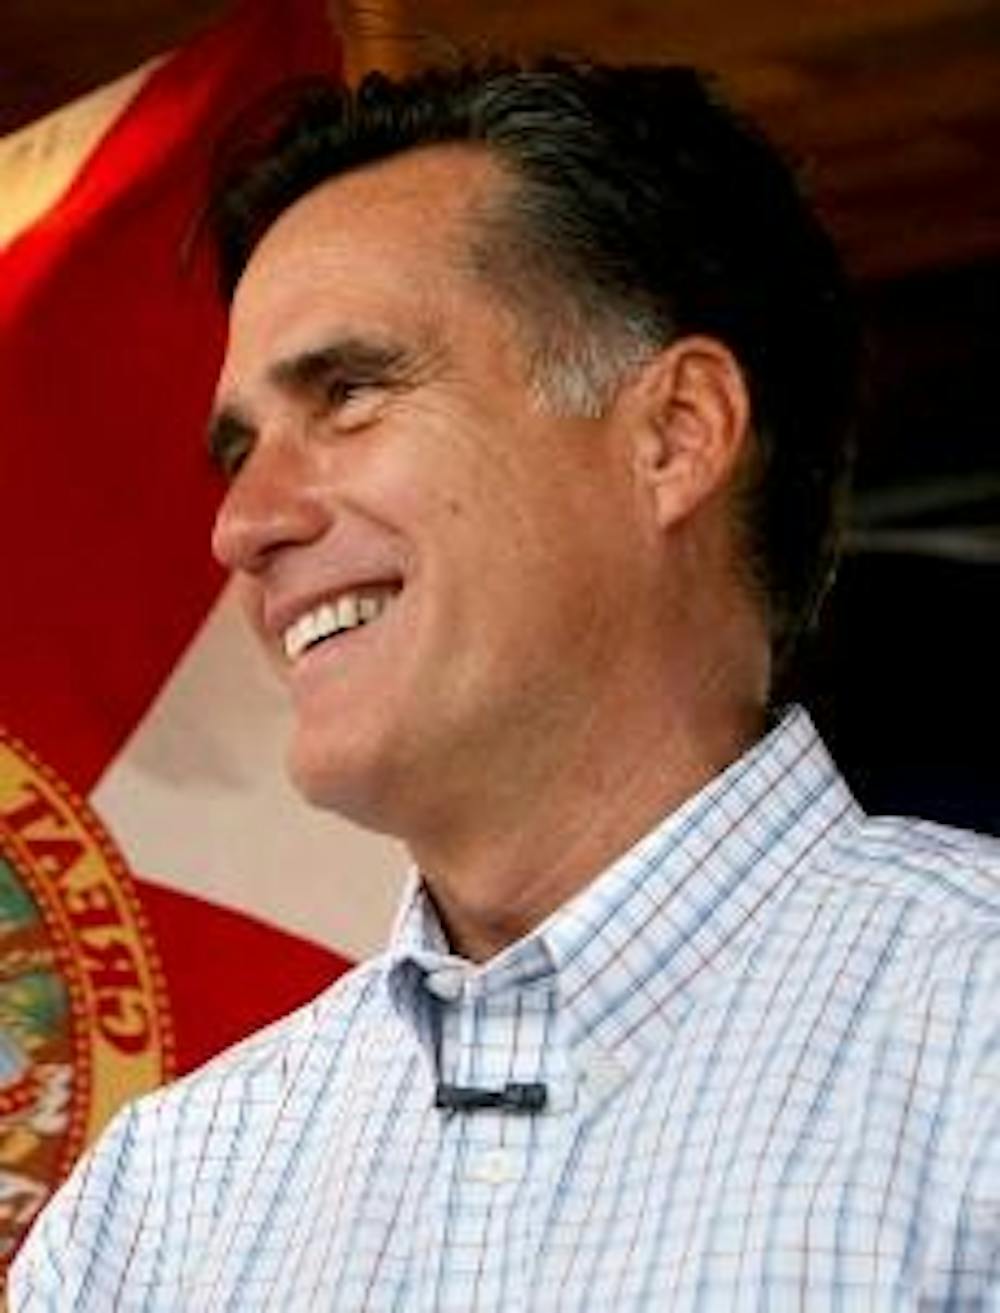 LAISSEZ-FAIRE MARKET - Former Massachusetts Gov. Mitt Romney says he wants to change health care from a government-driven to a market-driven entity. 